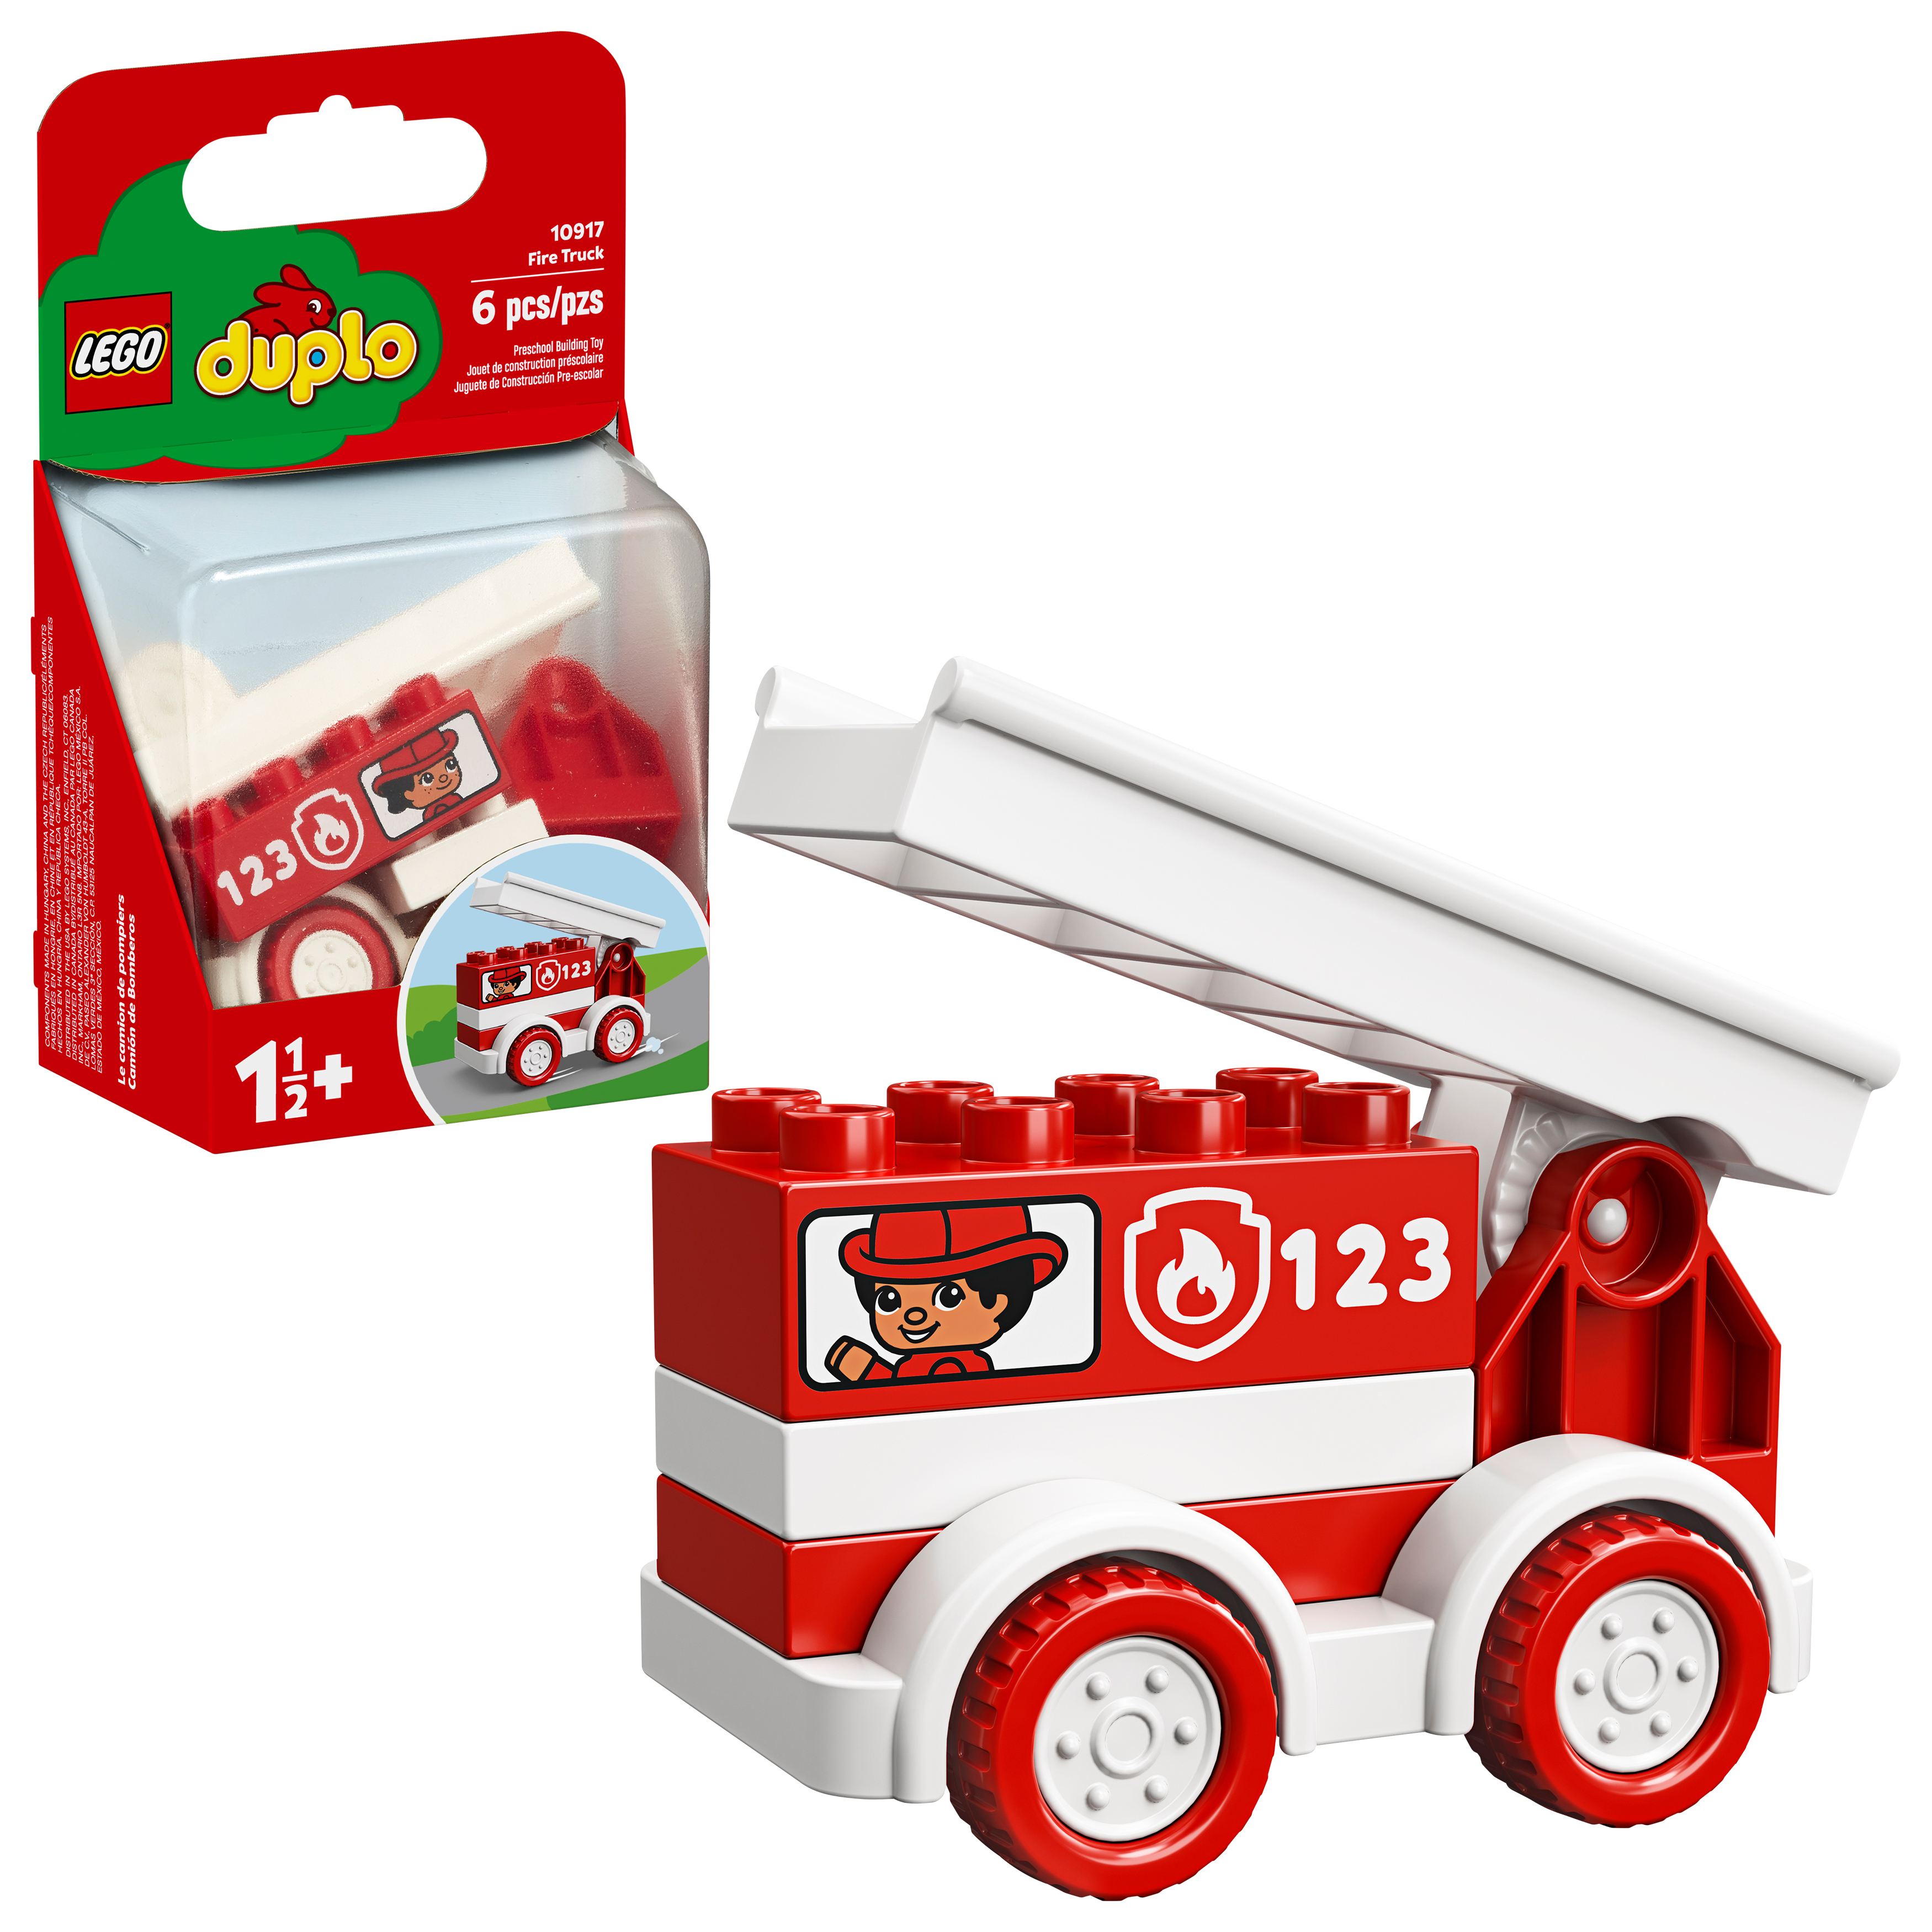 LEGO DUPLO My First Fire Truck 10917 Educational Building Toy for Toddlers (6 Pieces) - image 1 of 6